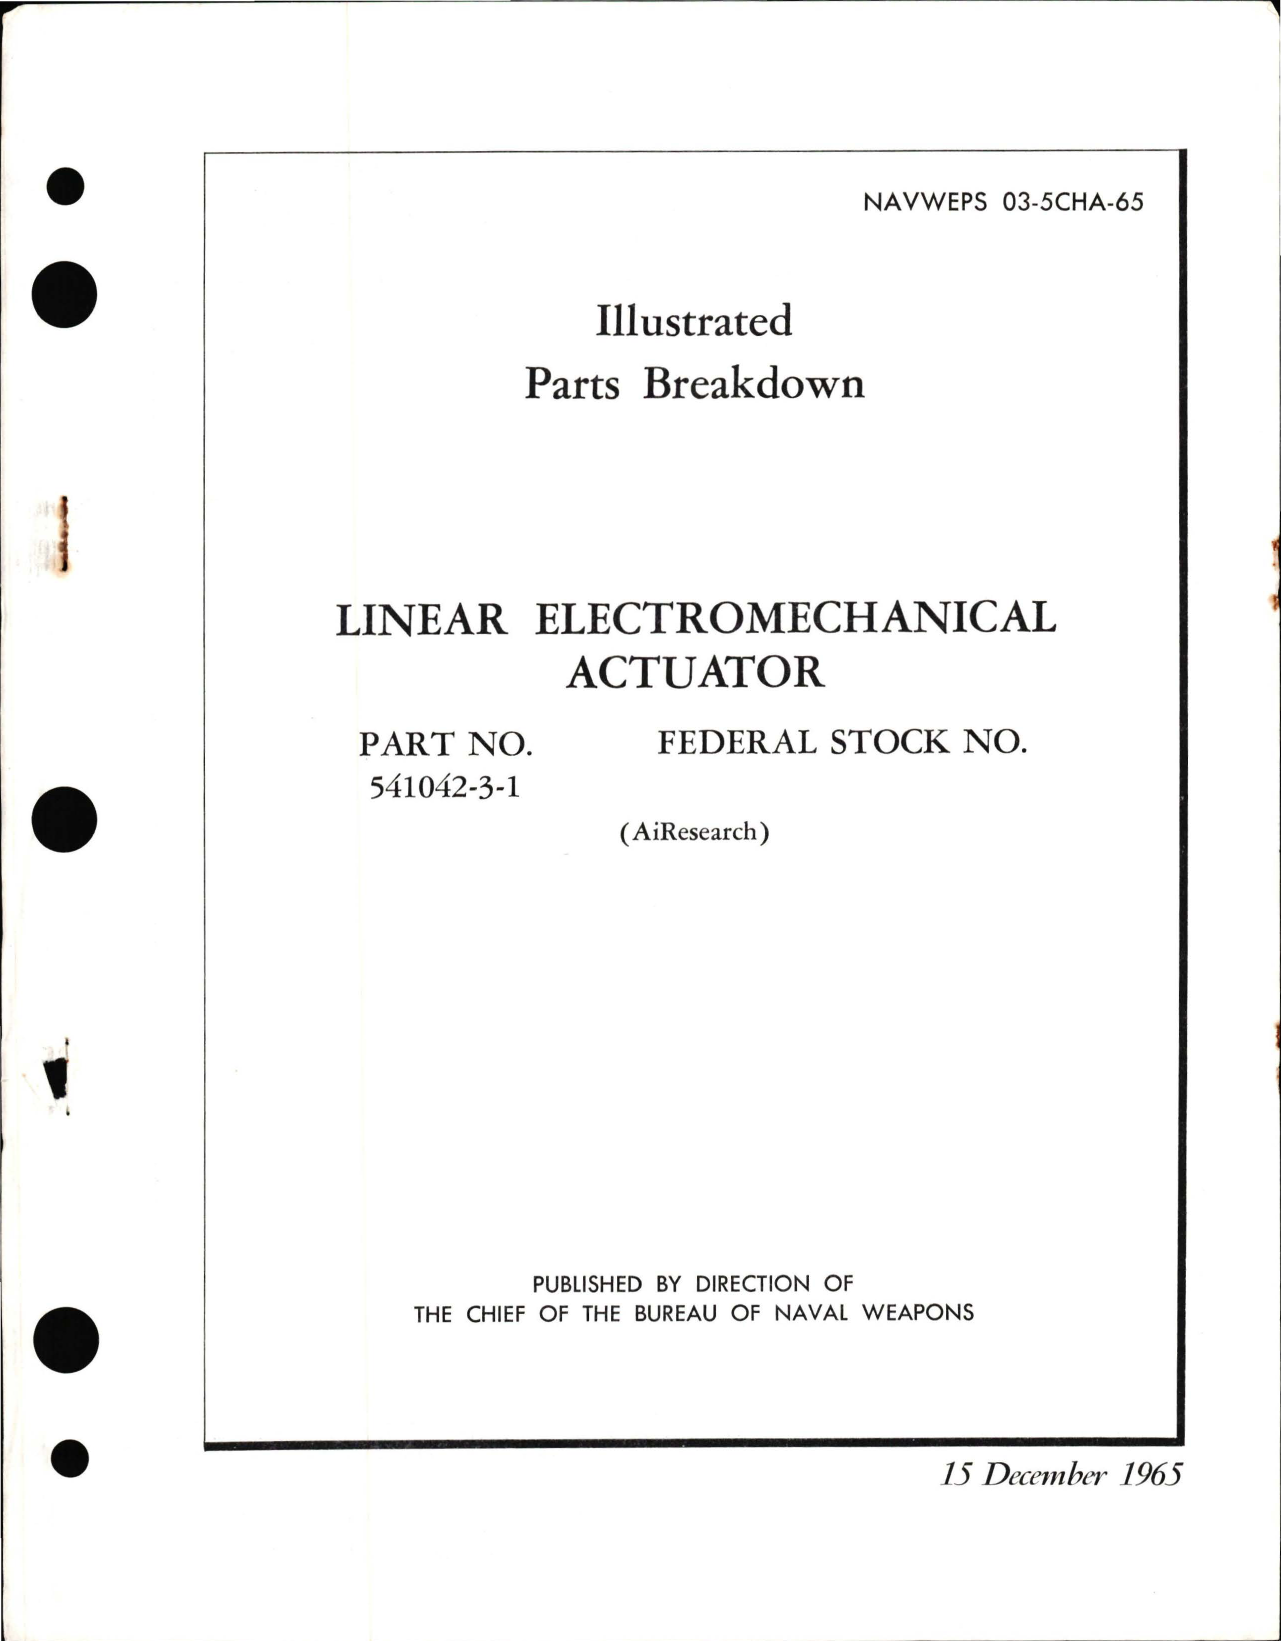 Sample page 1 from AirCorps Library document: Parts Breakdown for Linear Electromechanical Actuator - Part 541042-3-1 